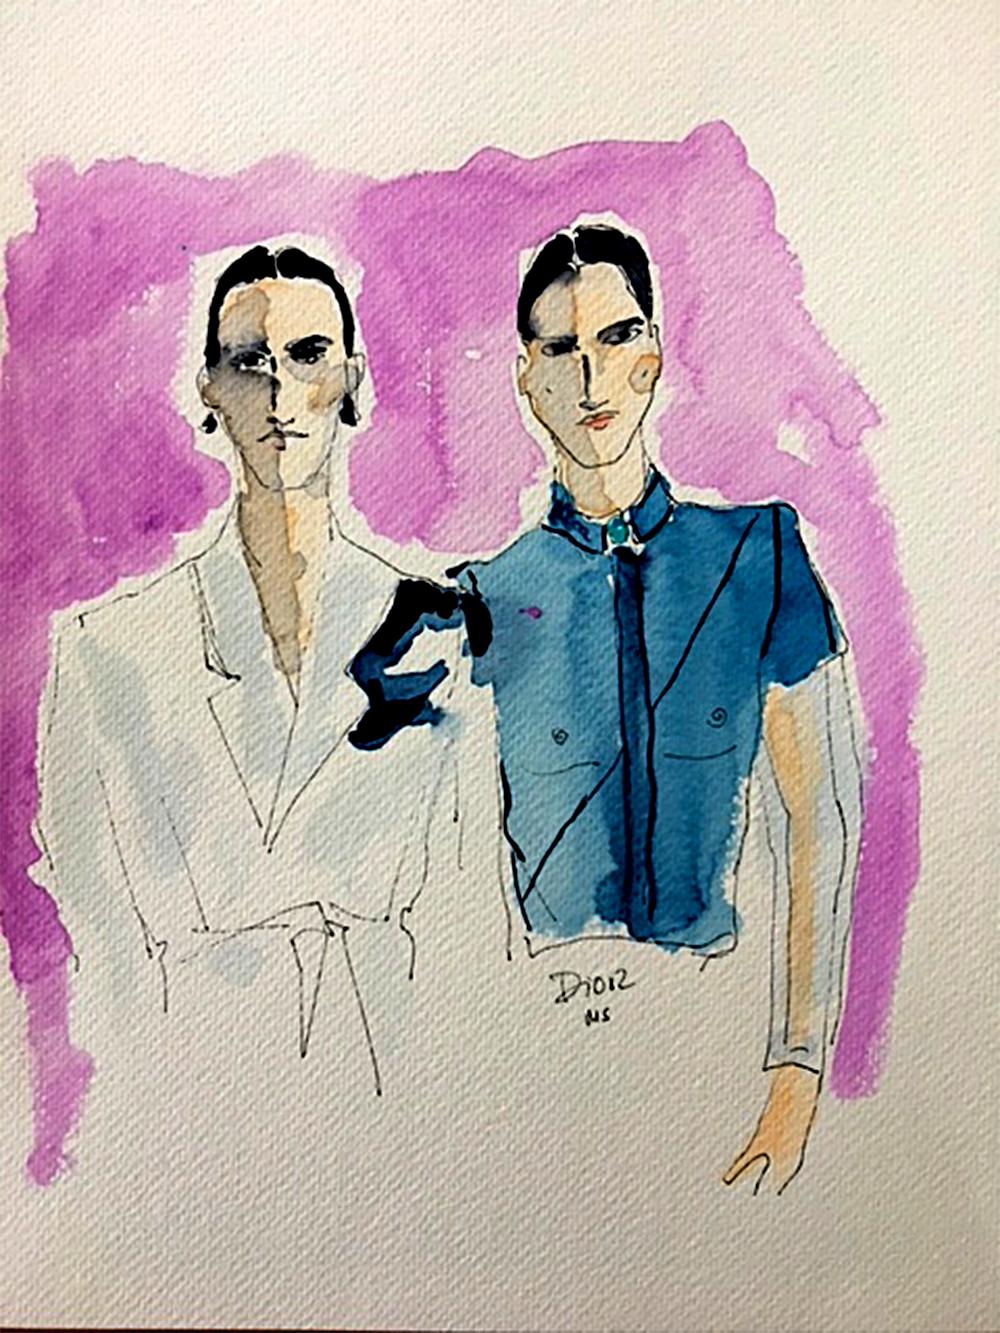 Dior, Fashion show models 2021. Watercolor fashion drawing on paper - Art by Manuel Santelices